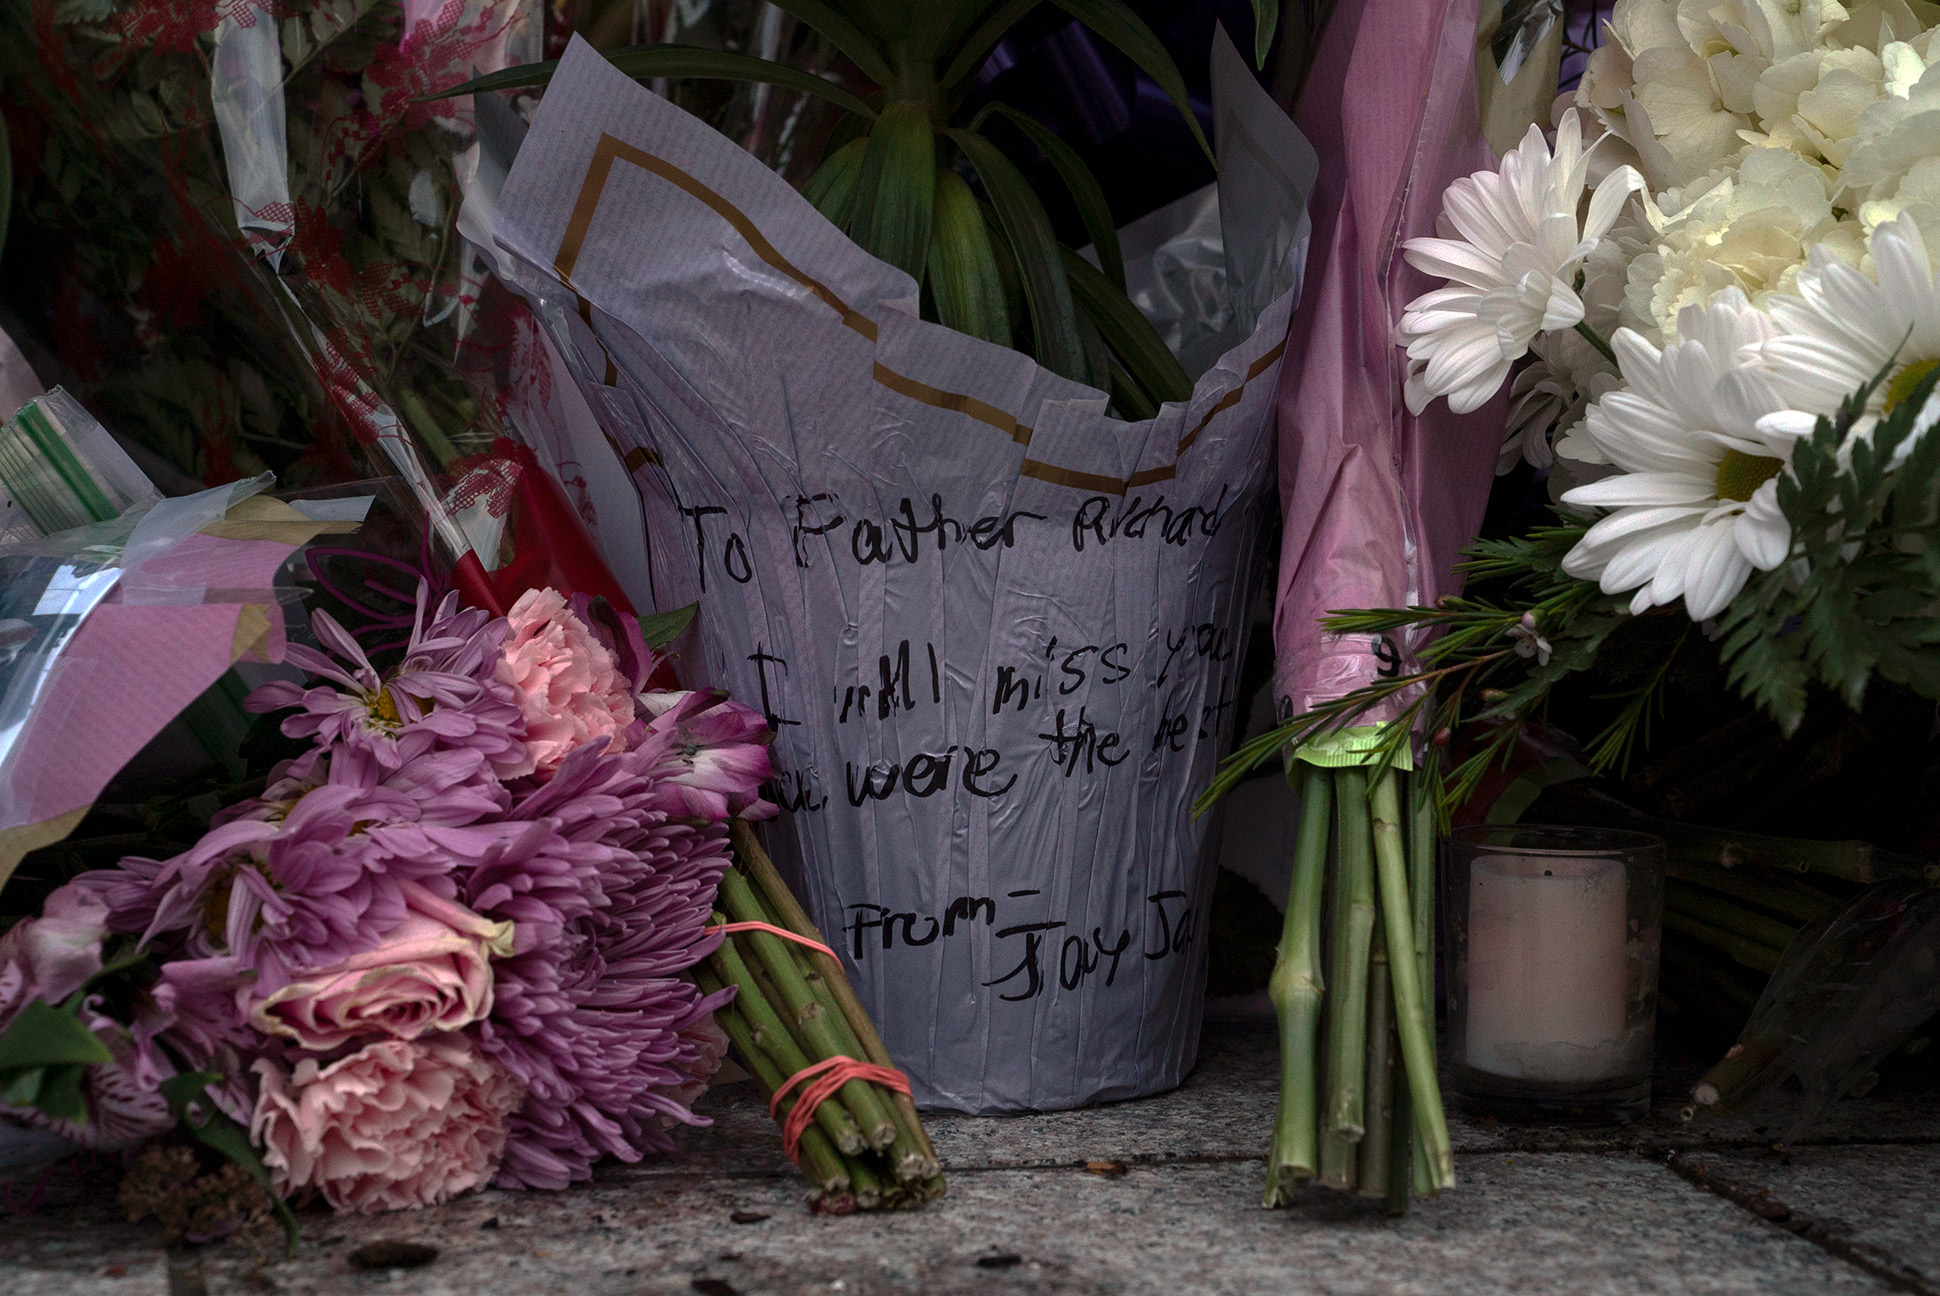 Flowers at a memorial for Monsignor Richard Guastella, who died from Covid-19 outside the doors of St. Clare Catholic Church in Staten Island, N.Y., April 10, 2020. (Paul Moakley for TIME)